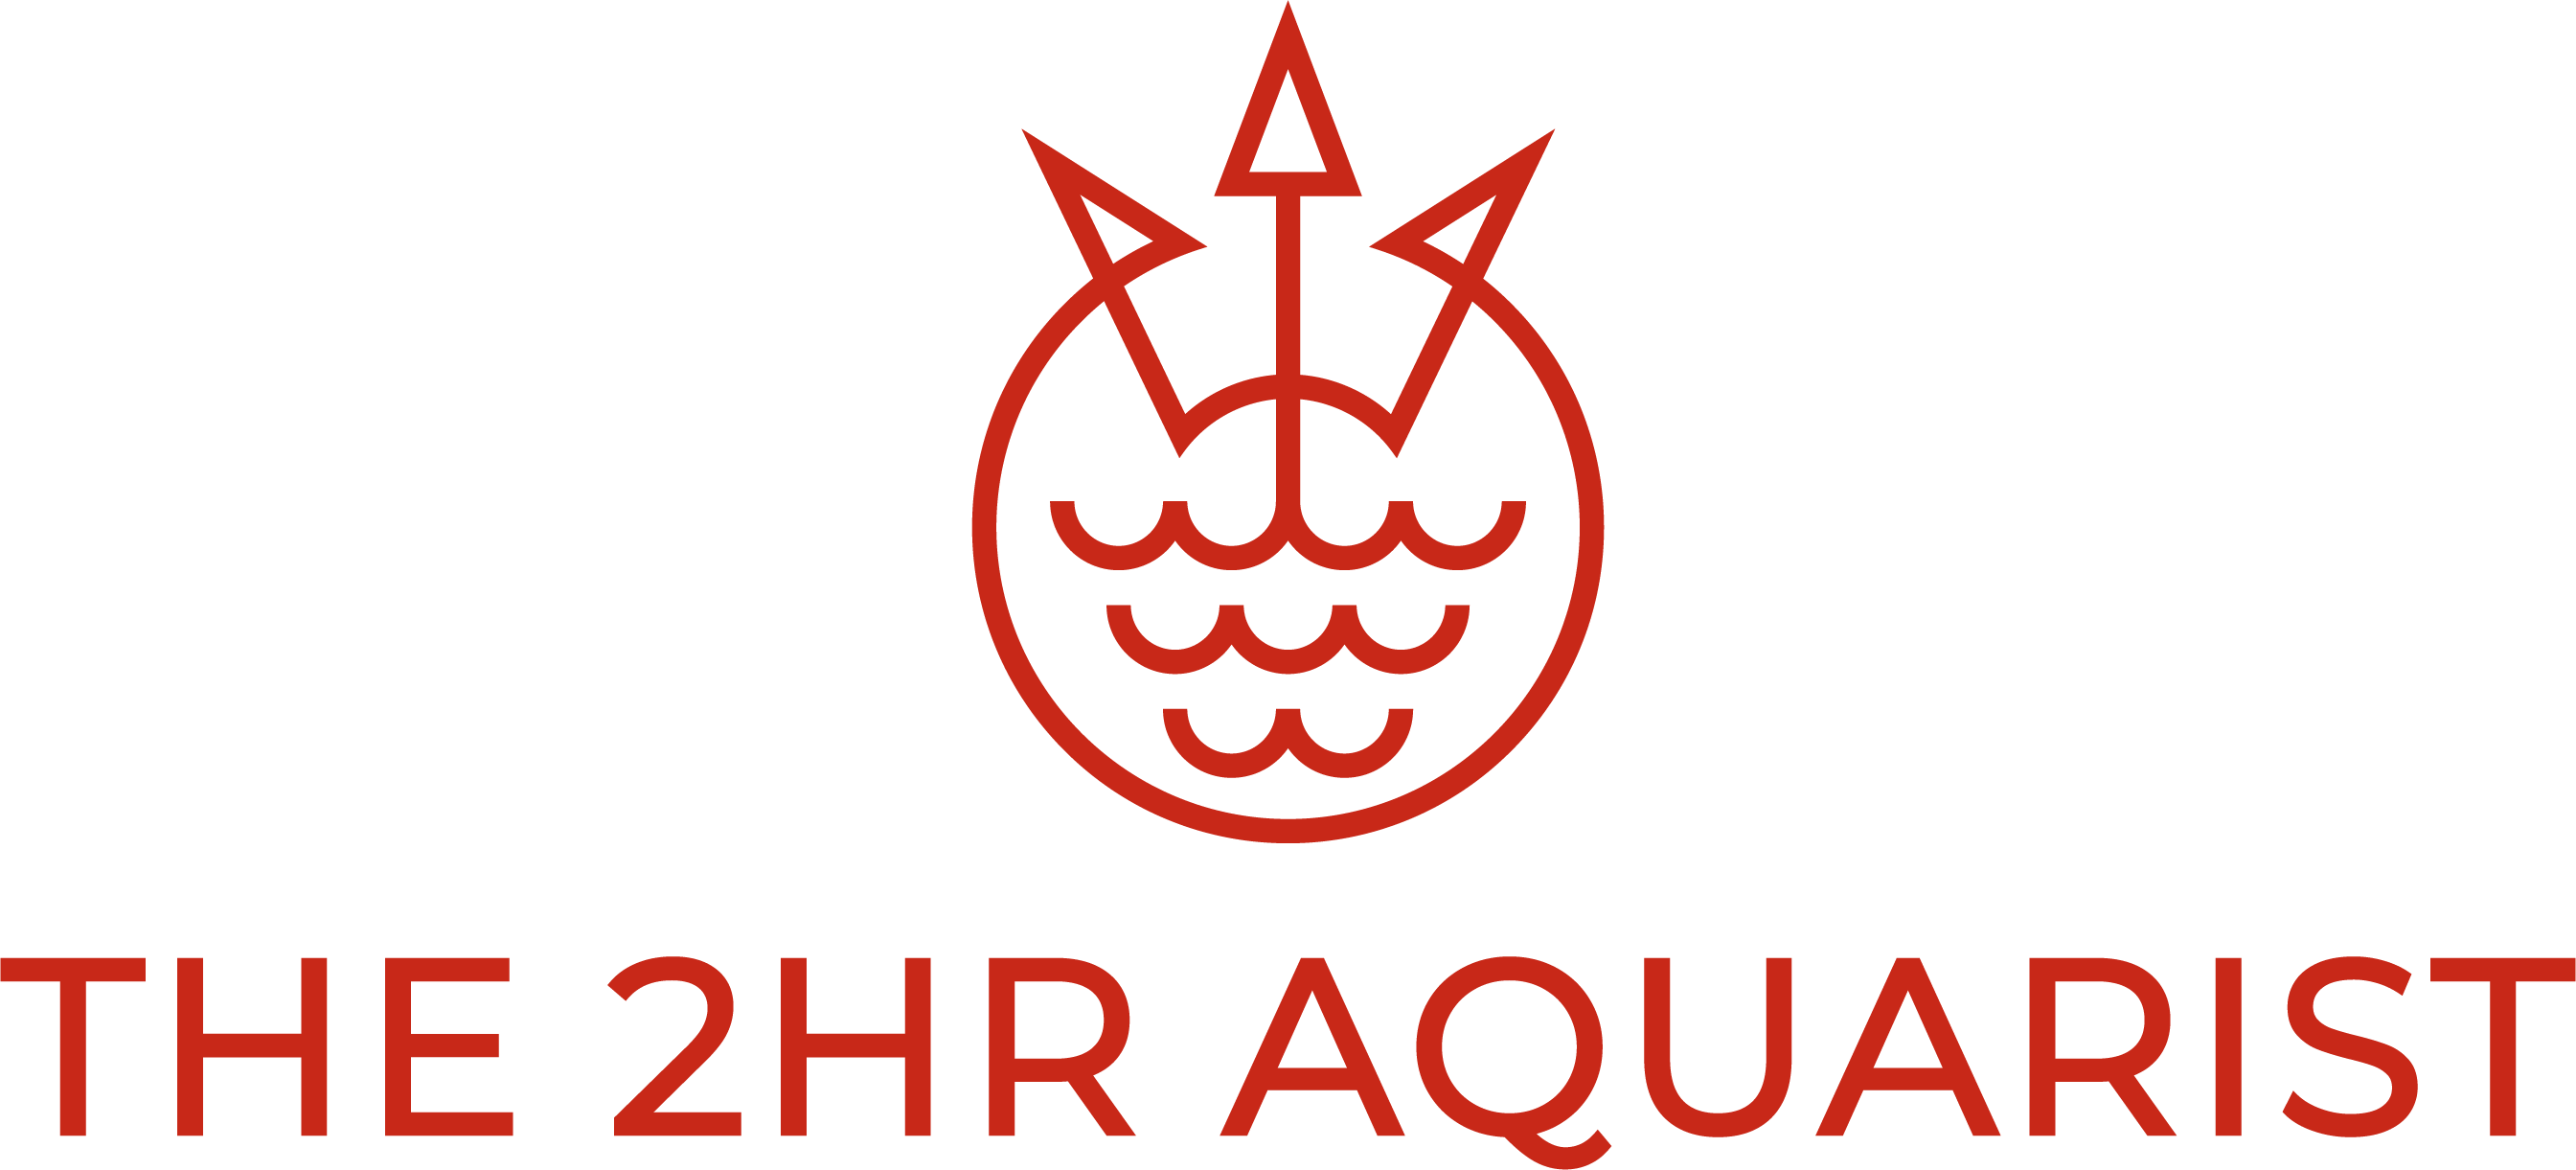 http://34.129.14.236/wp-content/uploads/2021/10/cropped-the-2hr-aquarist-logo-200_c72913.png